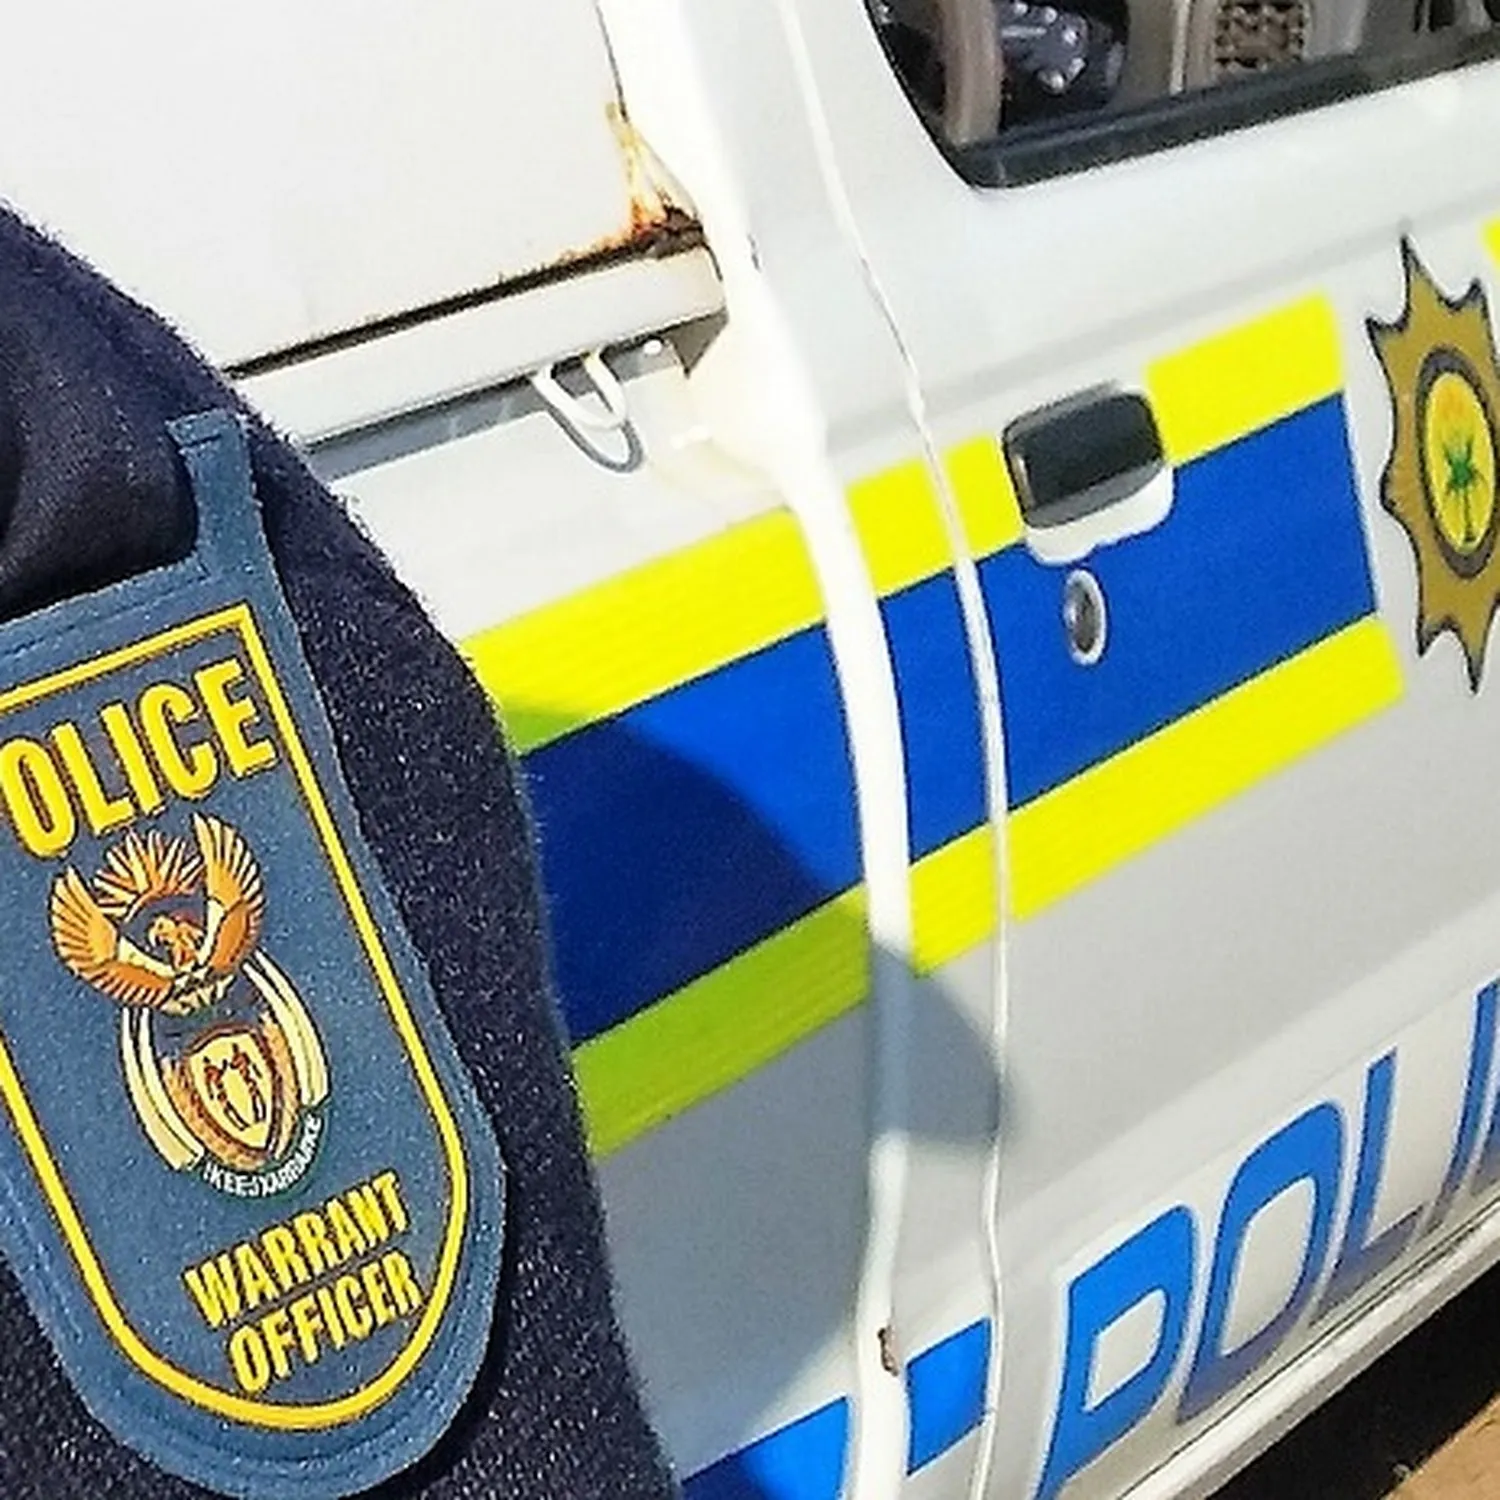 Police probe after 6 shot dead in Kwanobuhle, Eastern Cape